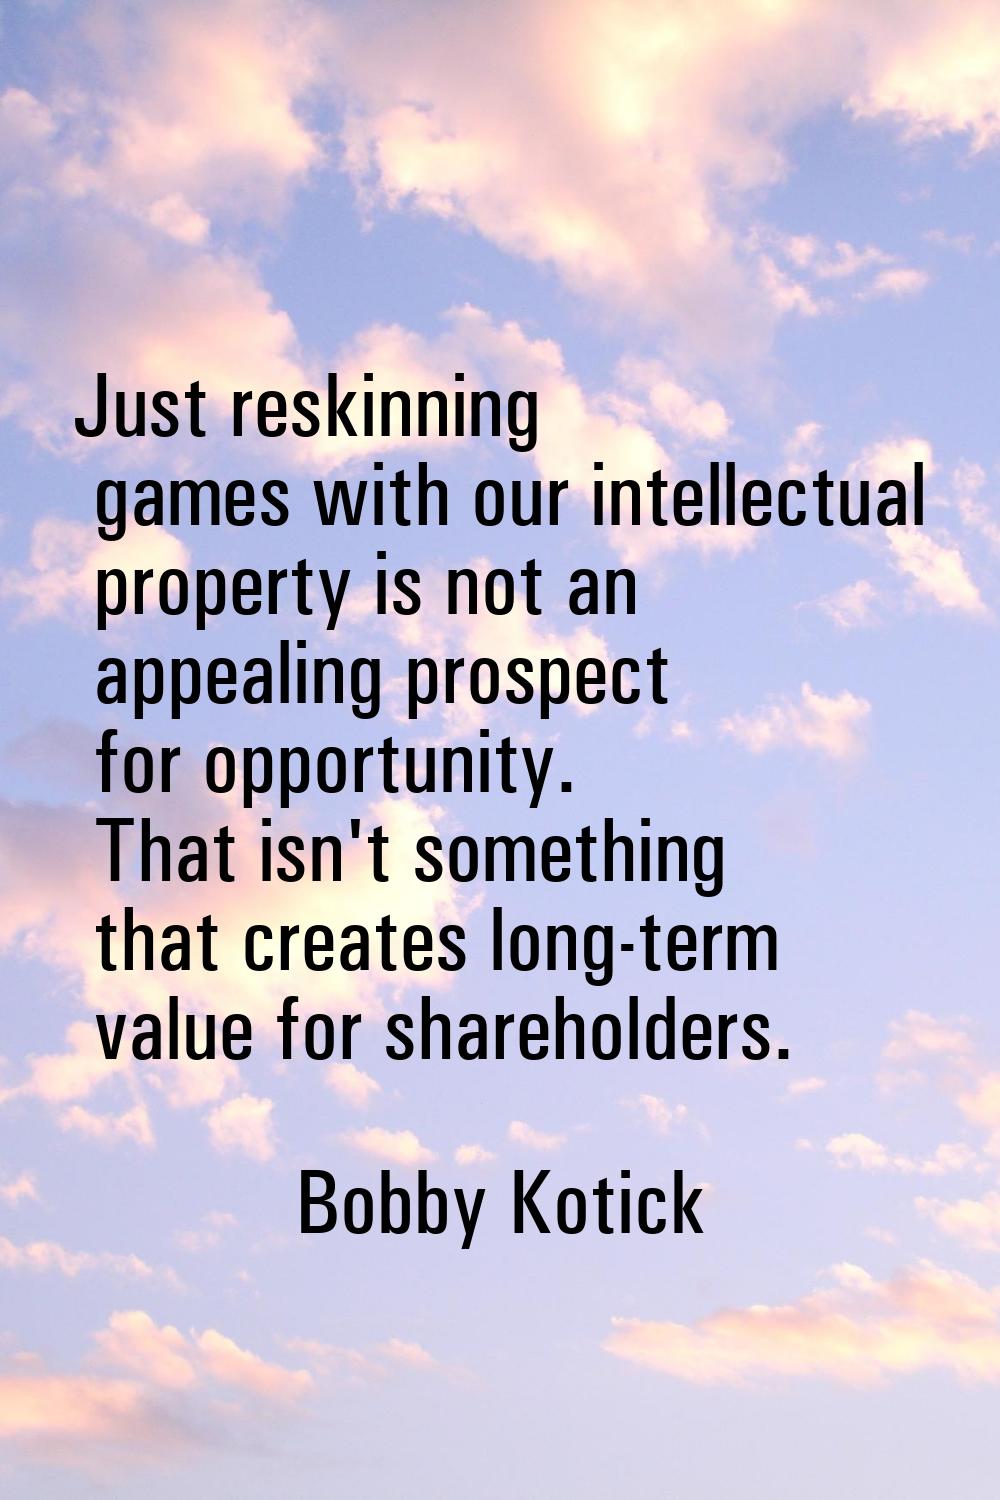 Just reskinning games with our intellectual property is not an appealing prospect for opportunity. 